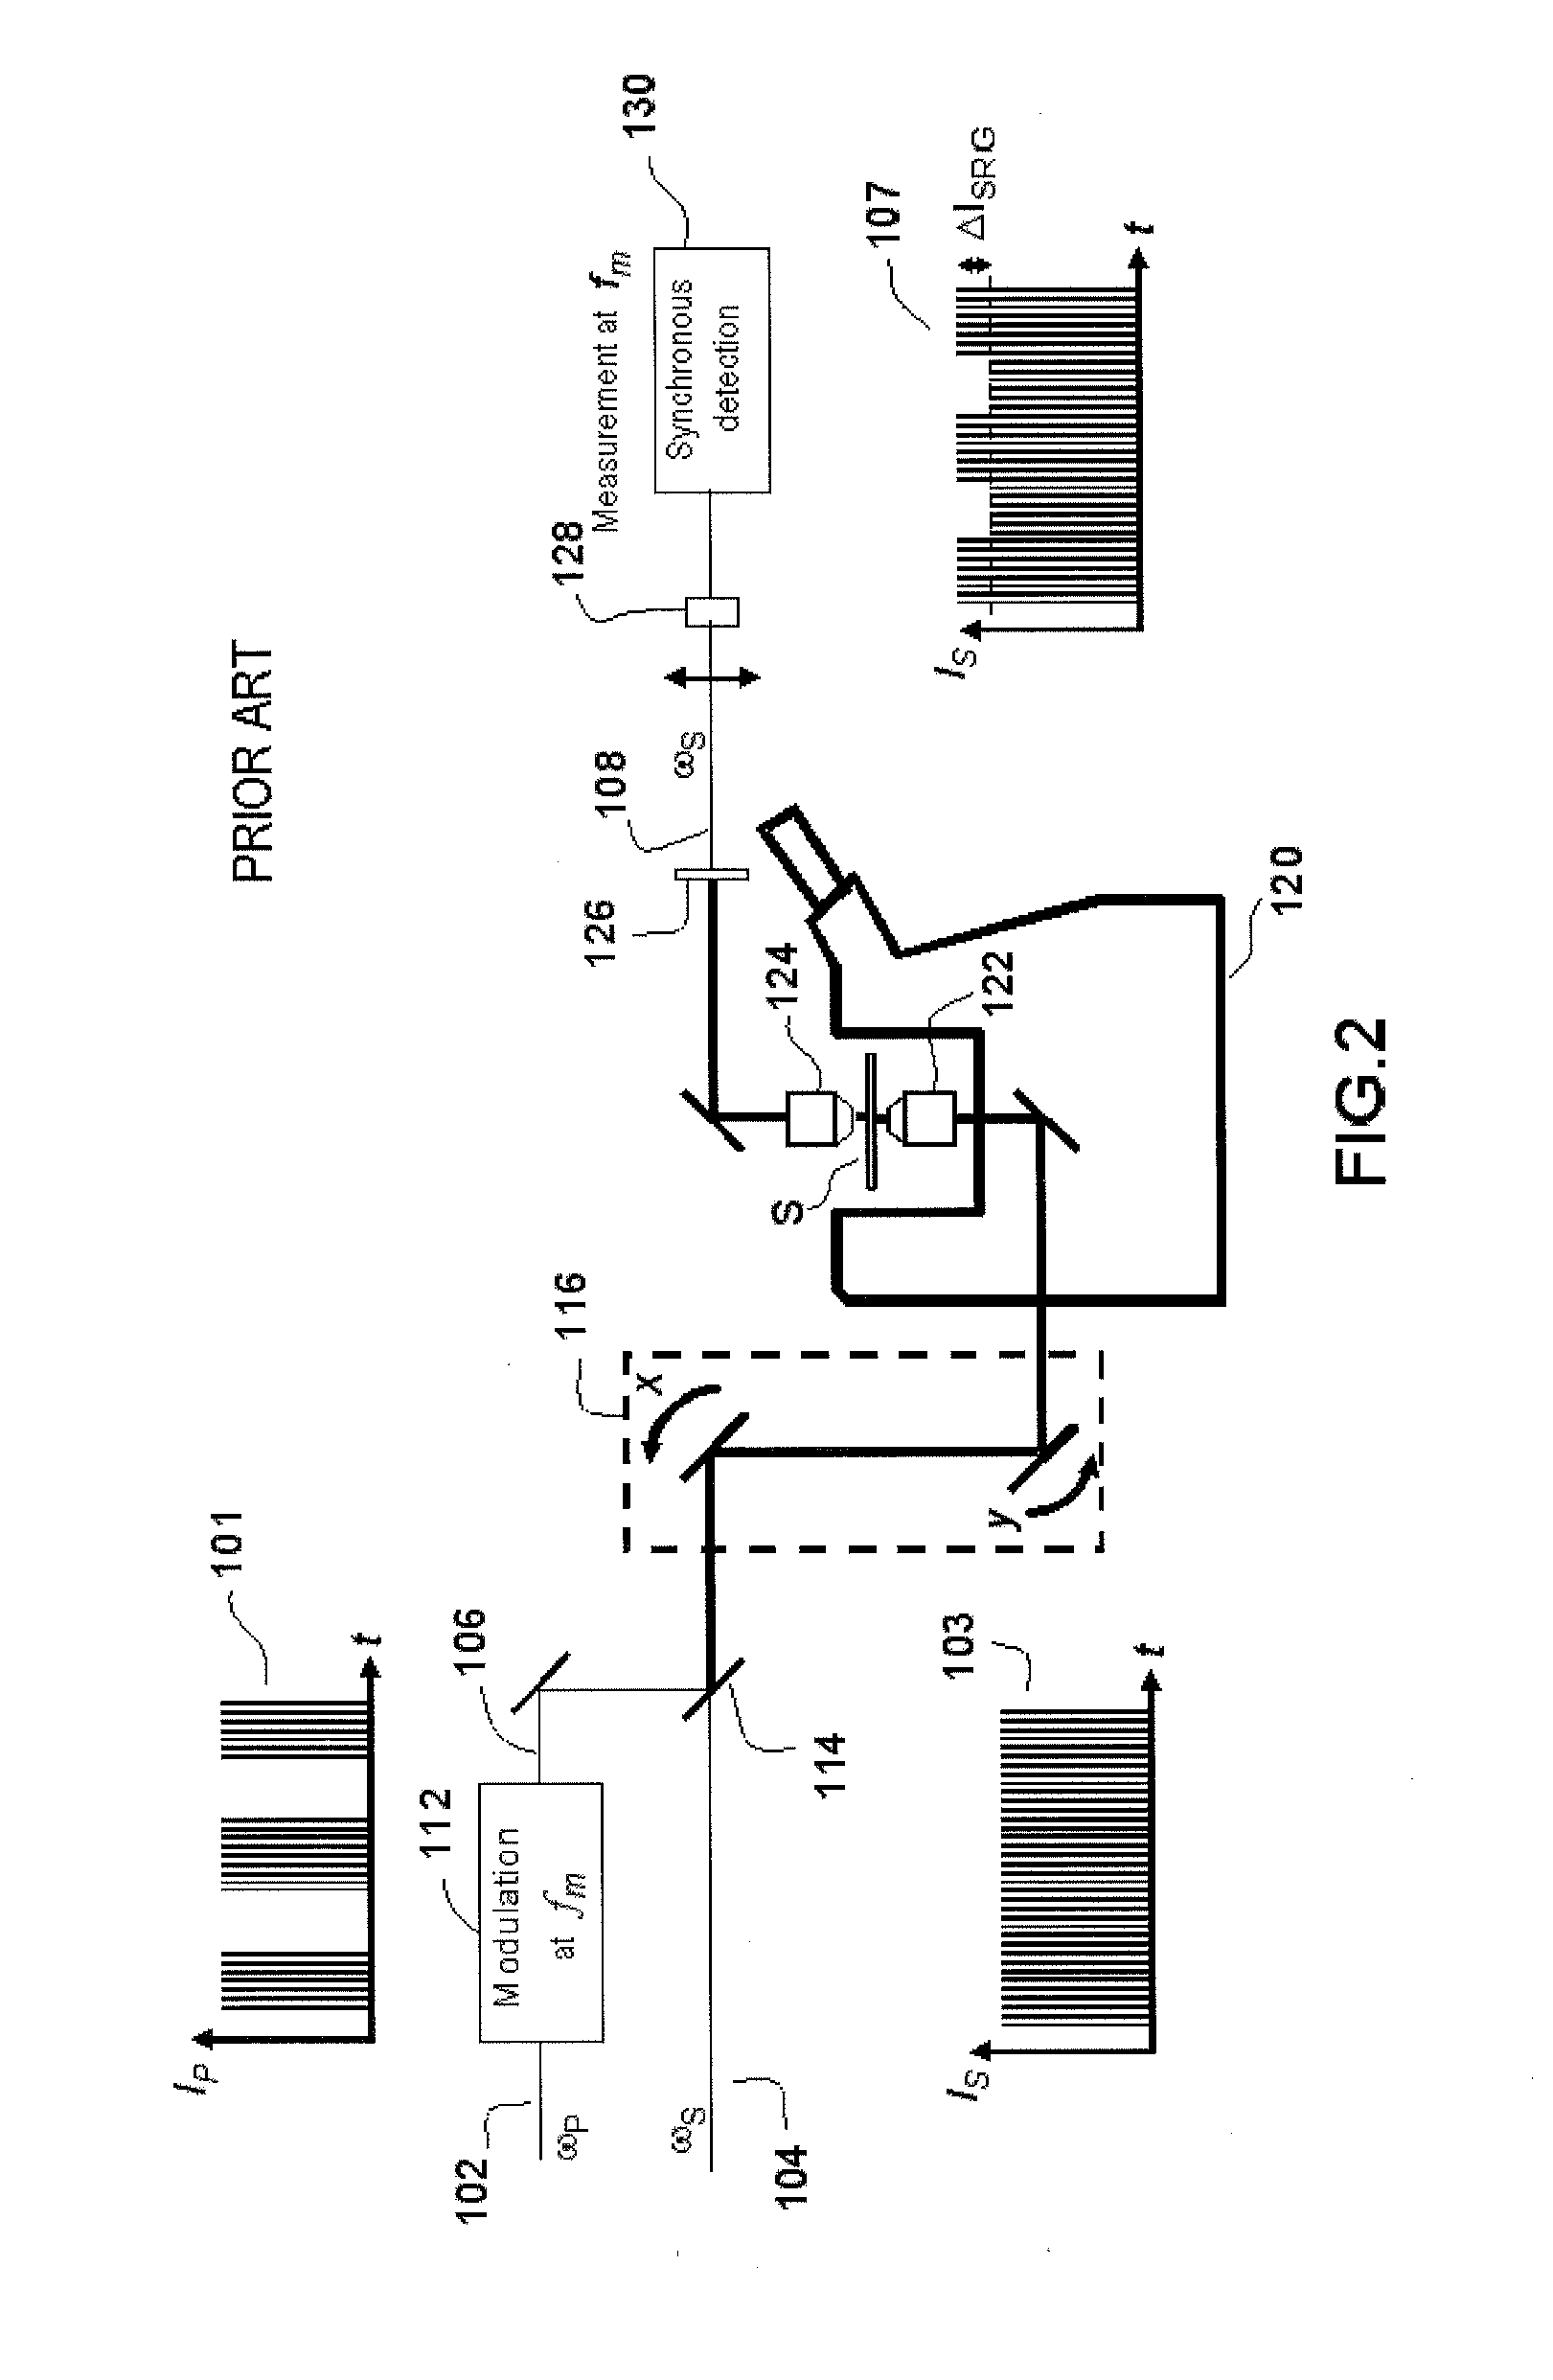 Device and method for stimulated Raman detection